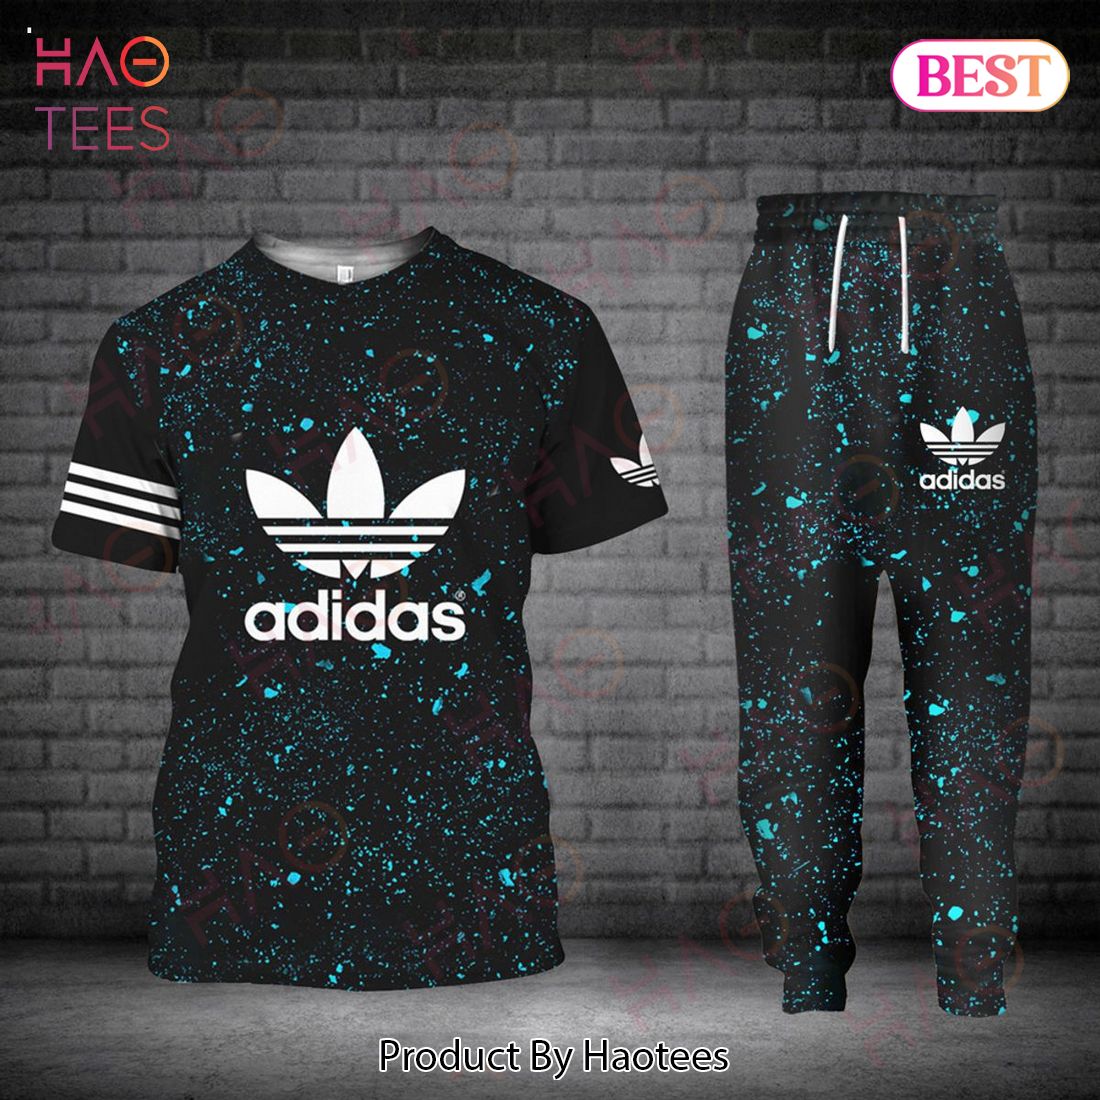 Adidas Black Blue T-Shirt And Pants Luxury Brand Limited Edition